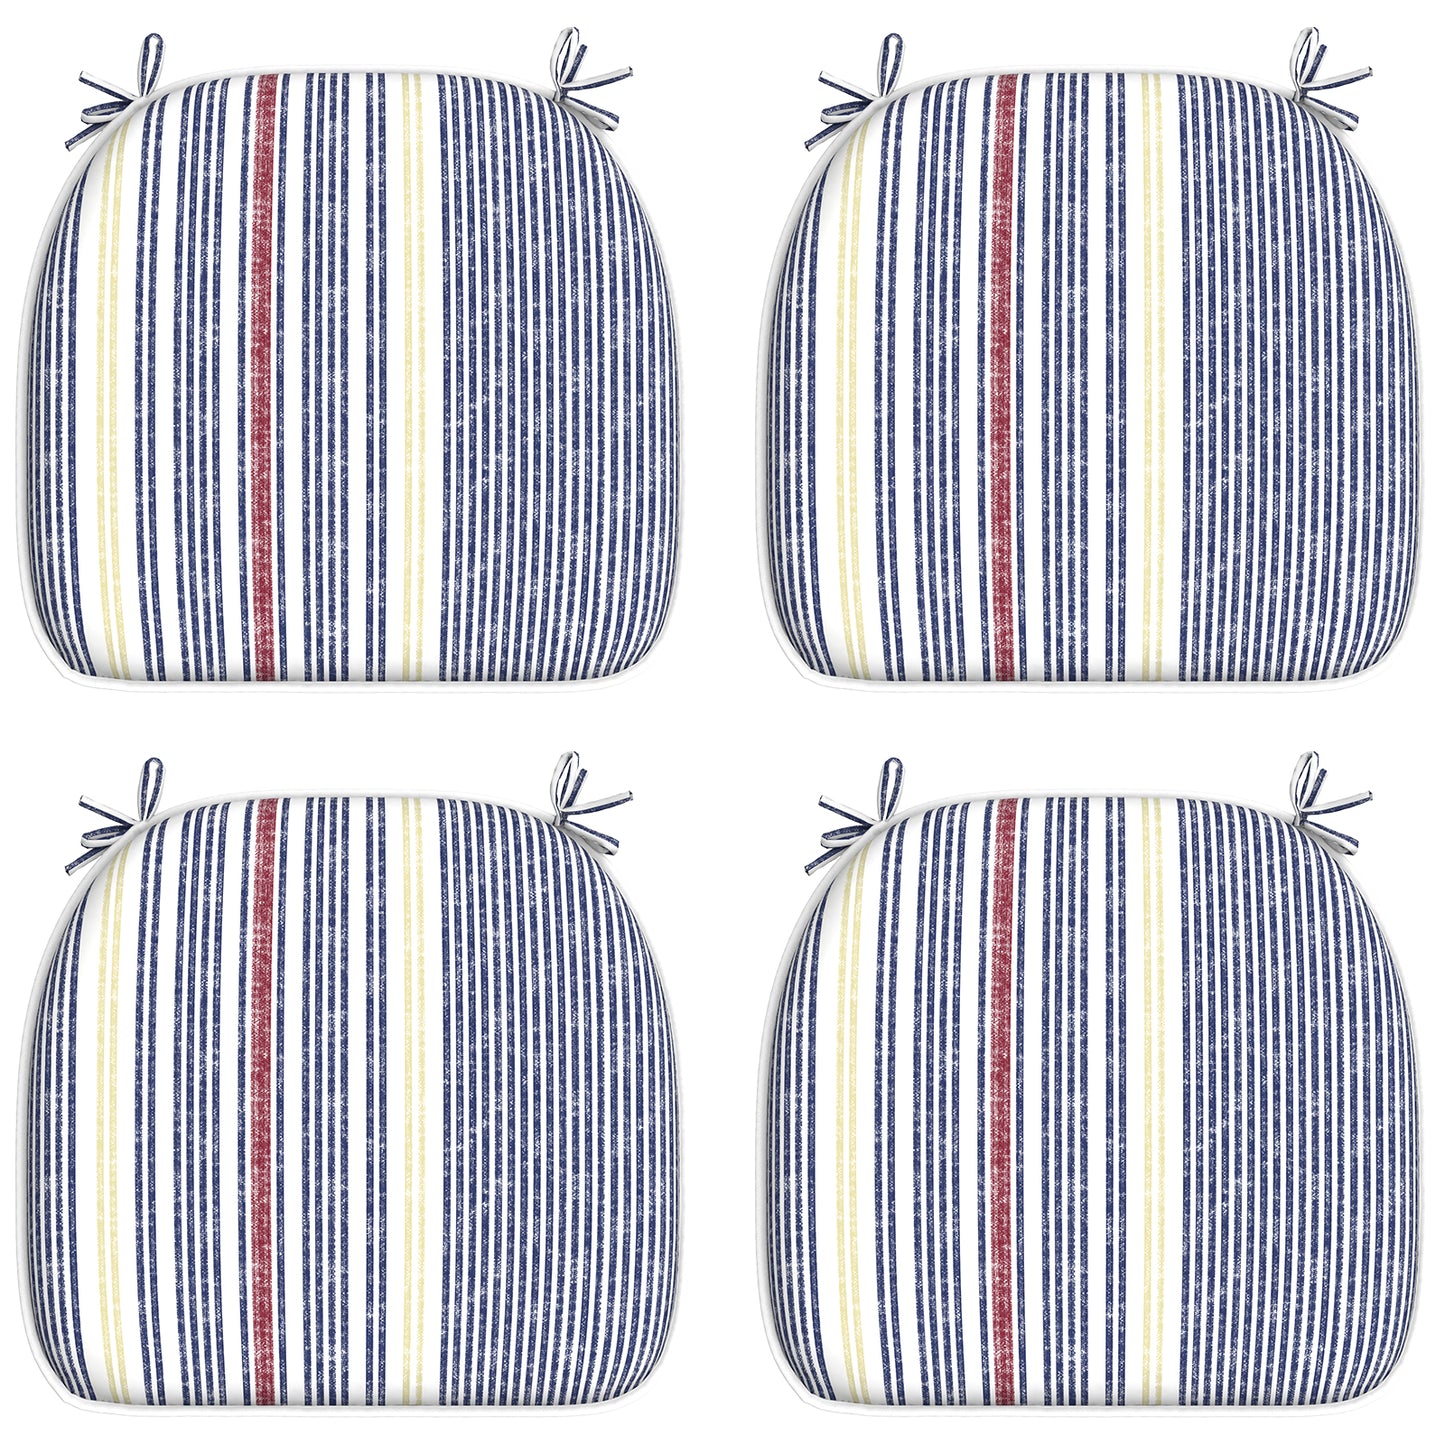 Melody Elephant Outdoor Chair Cushions Set of 4, Water Resistant Patio Chair Pads with Ties, Seat Cushions for Home Garden Furniture Decoration, 16”x17”,  Stripe Denim Blue